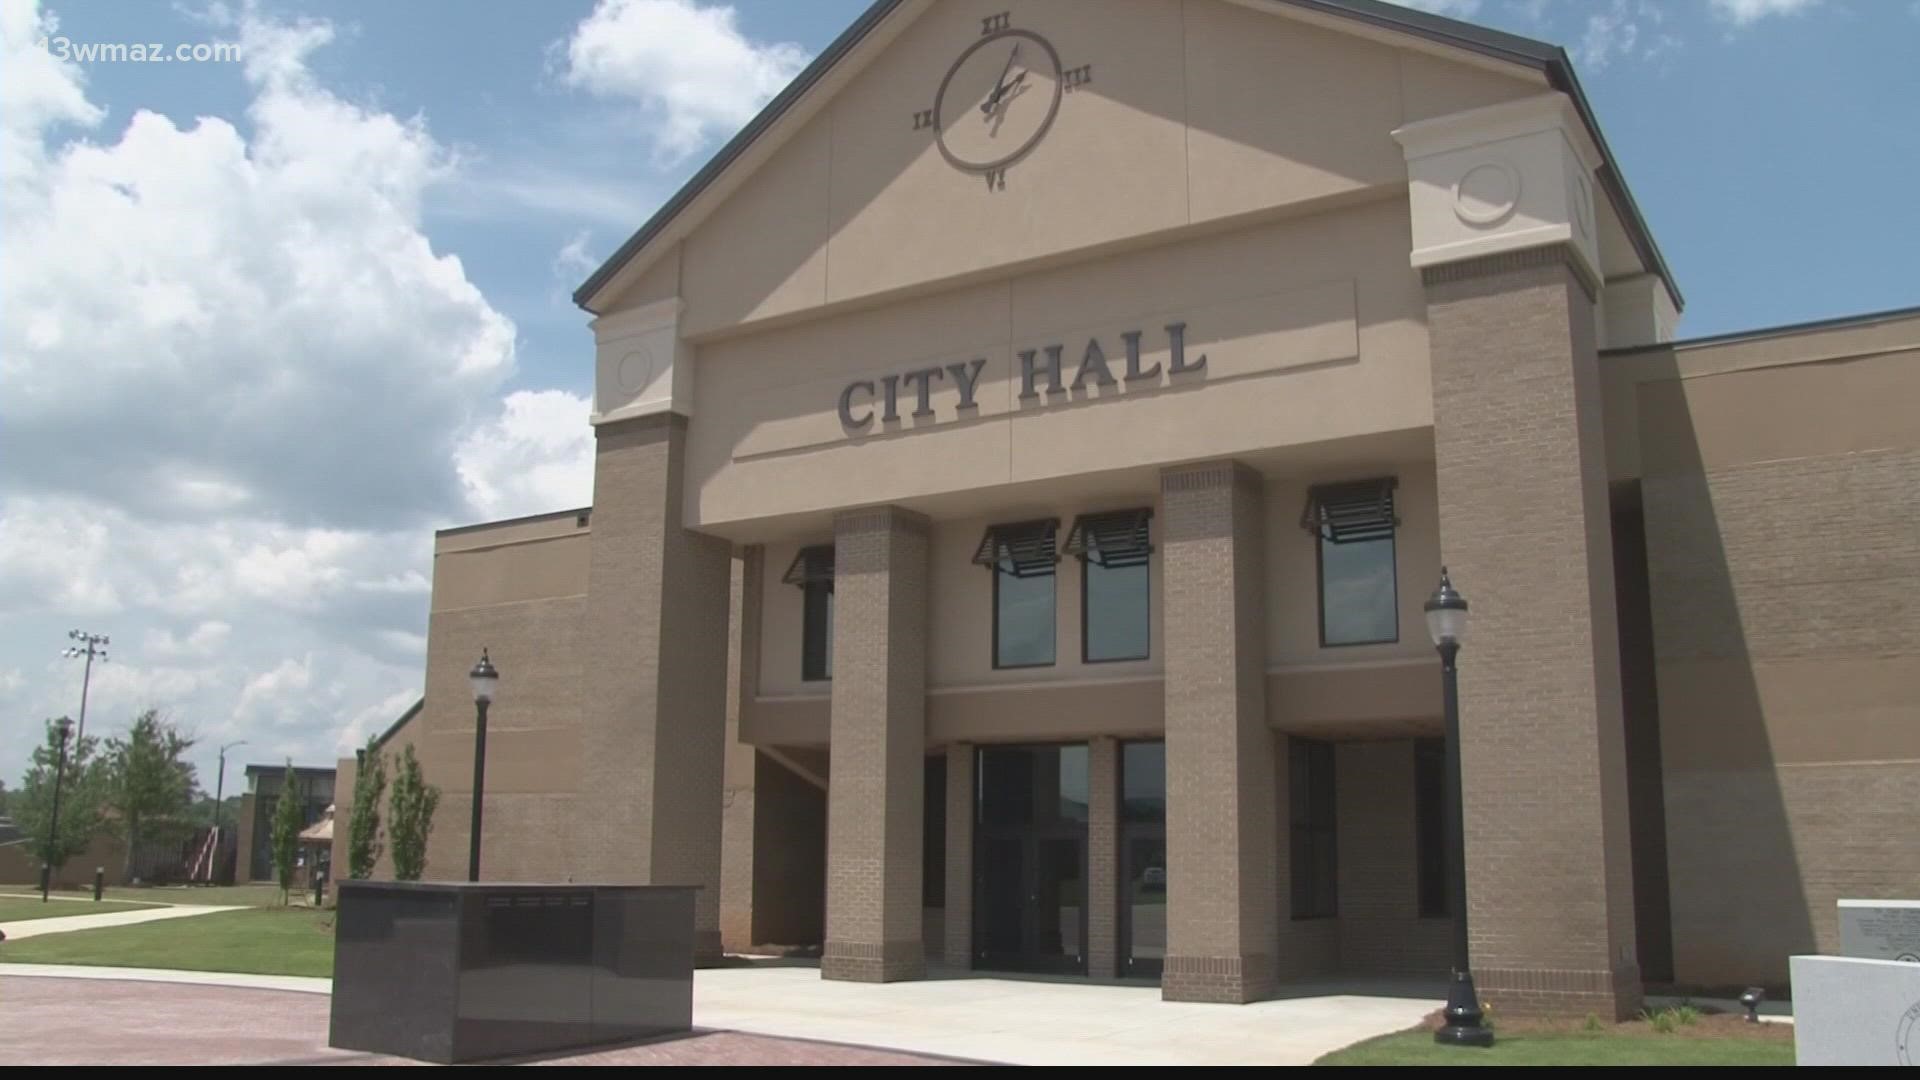 Warner Robins' city administrator signed a $347,000 contract without authorization from mayor and council